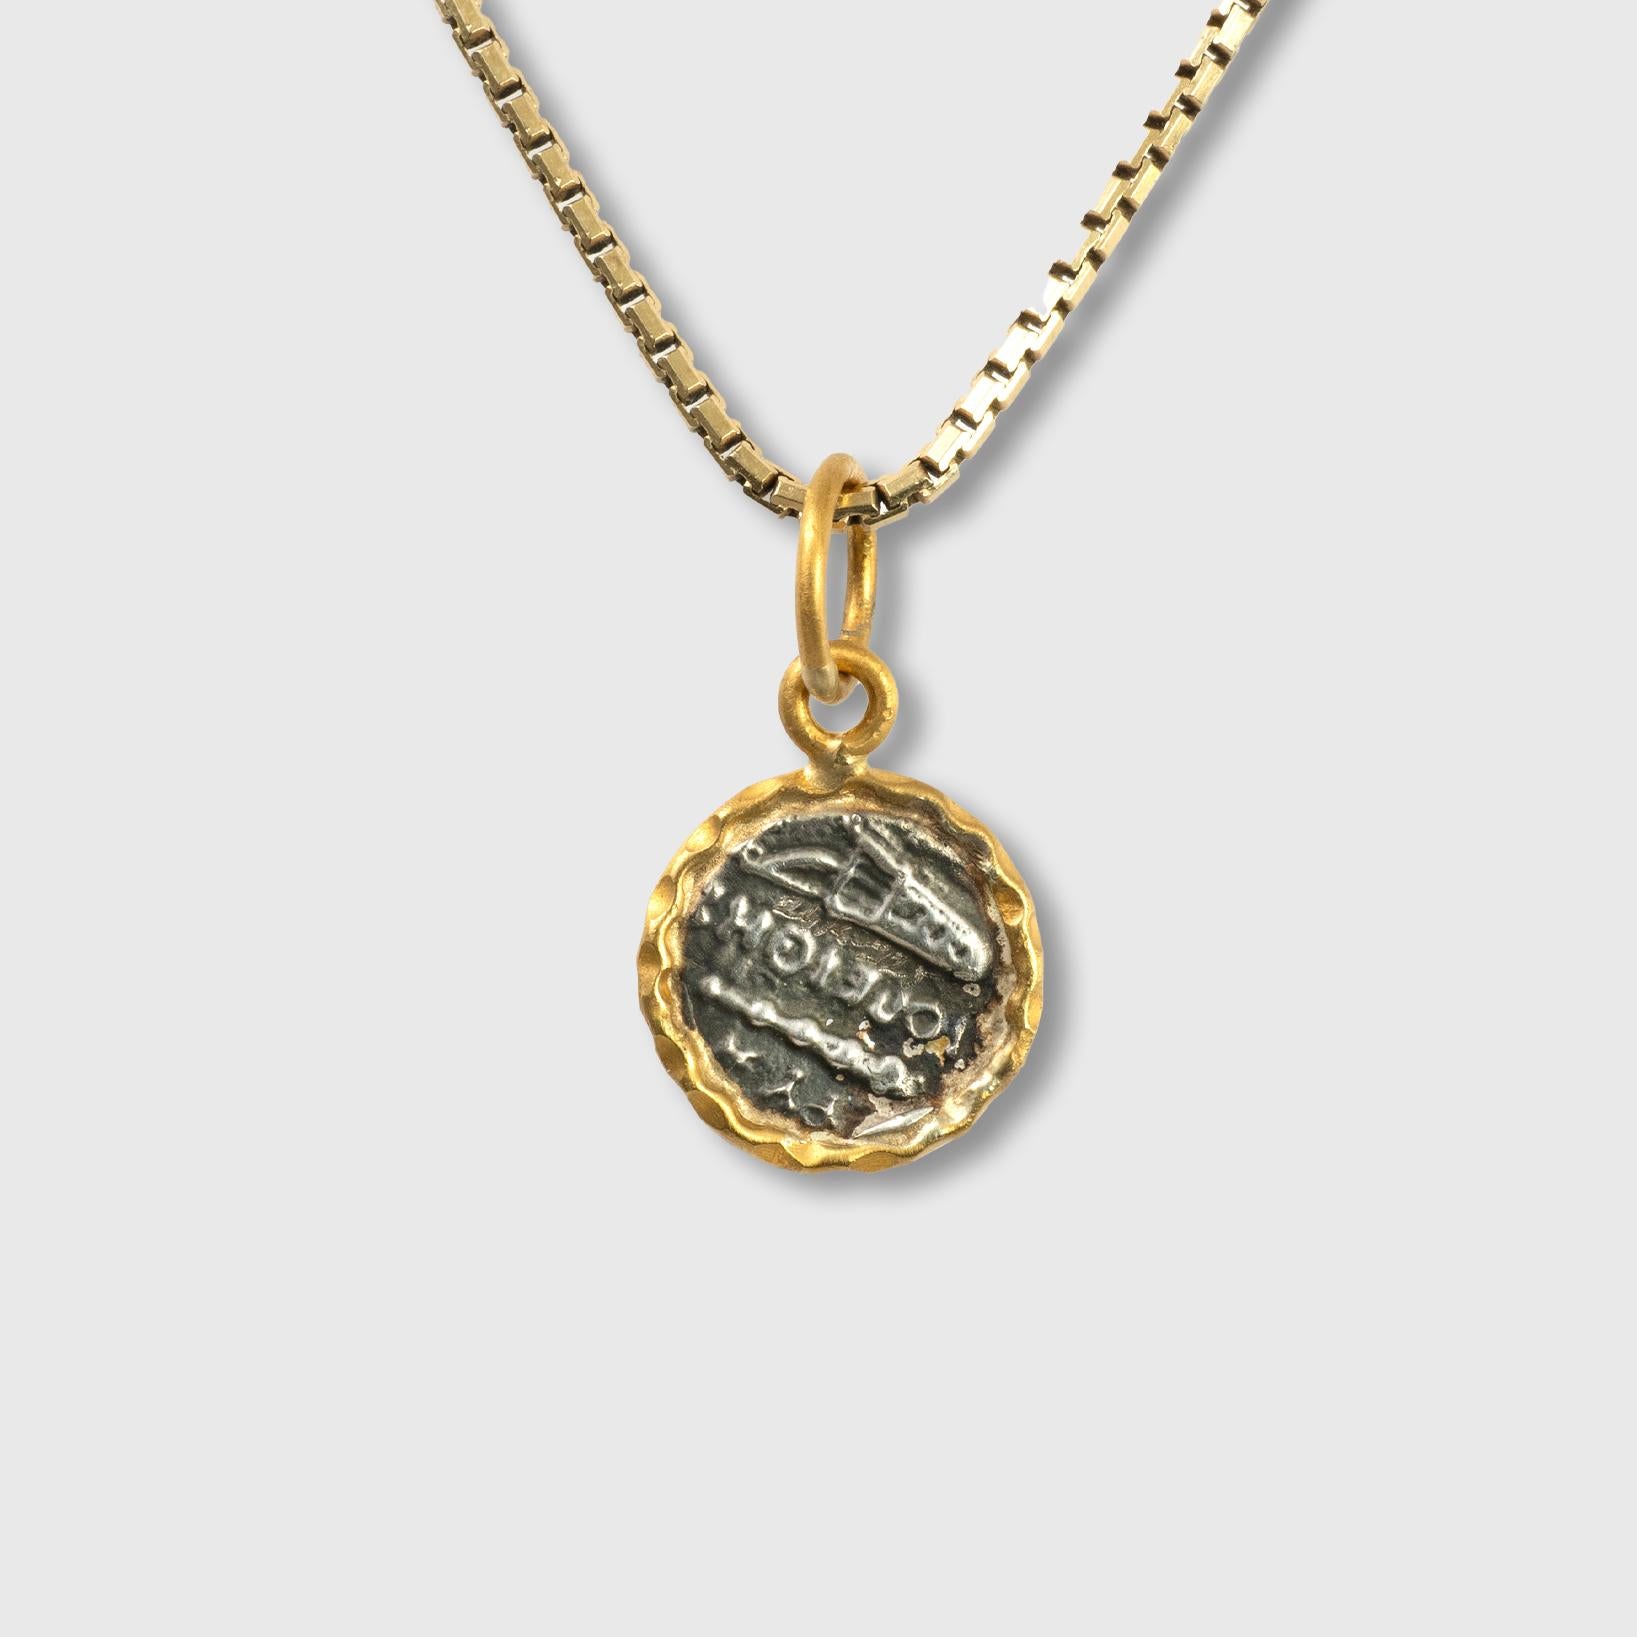 24kt Yellow Gold and Sterling Silver Coin-Charm Pendant Necklace of Athena (Sterling silver coin replica) framed in 24kt Yellow Gold.  

Athena was one of the twelve chief Olympian deities and the goddess associated with wisdom, craft, and warfare.